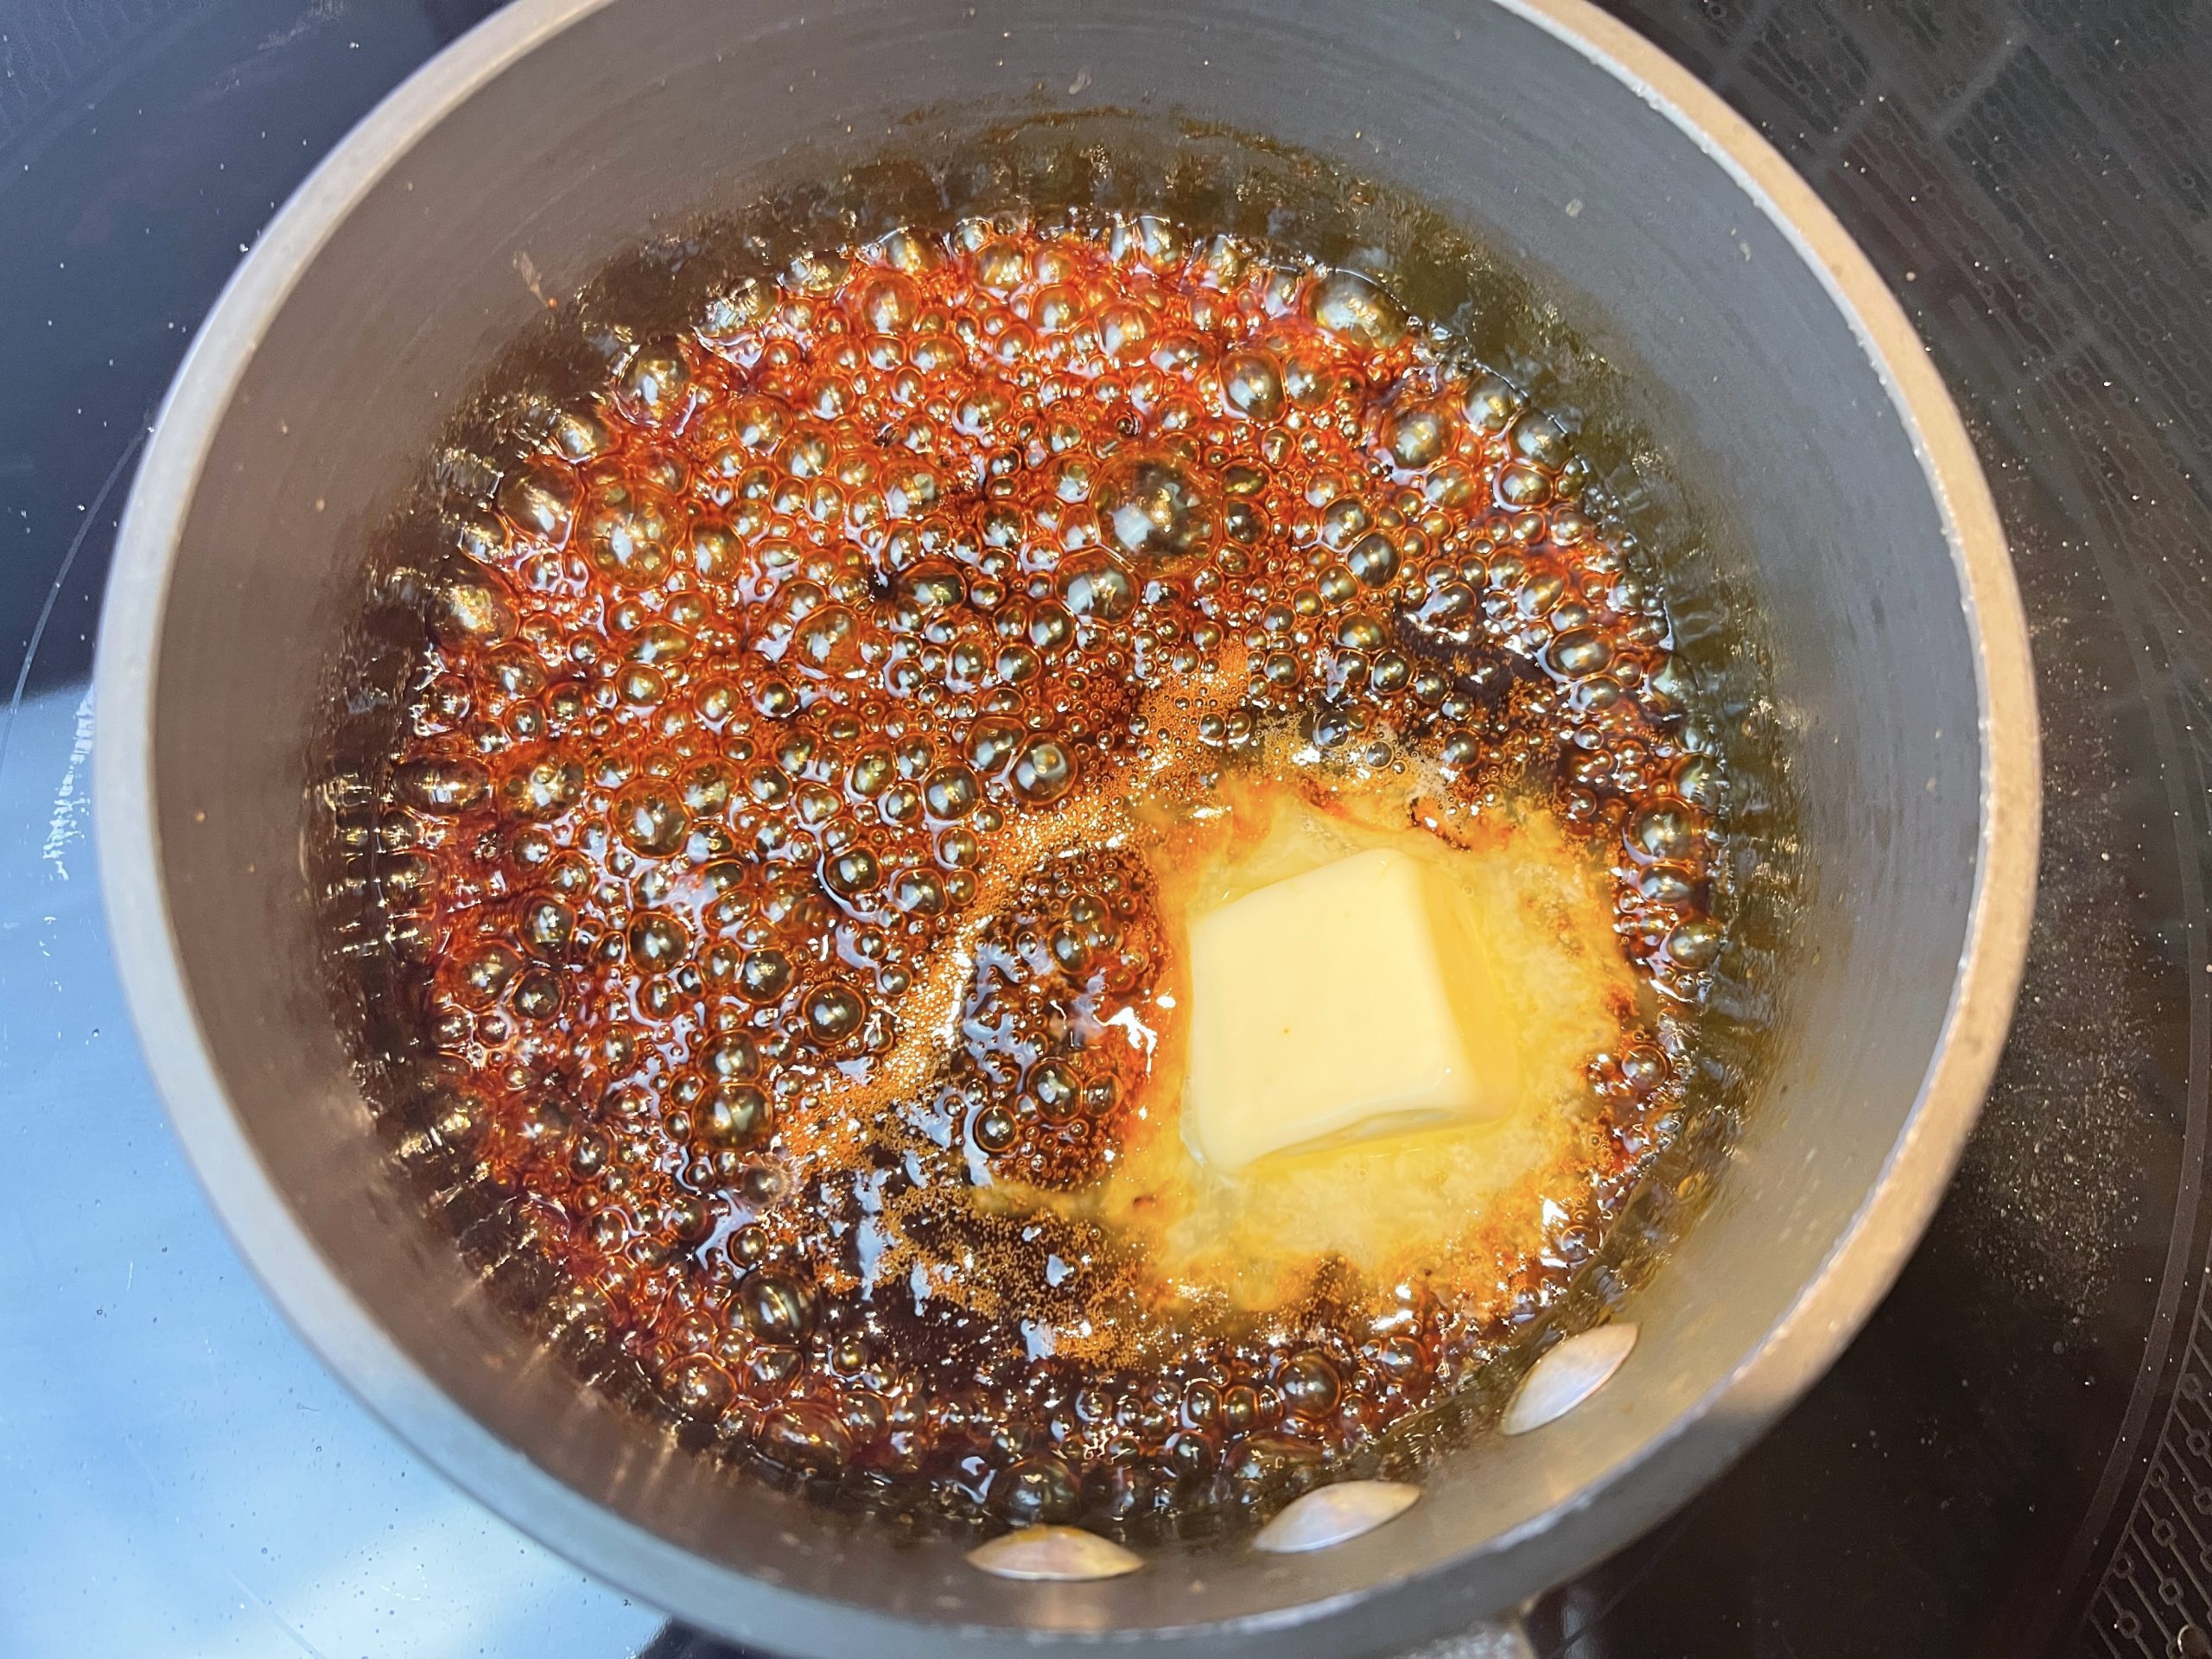 Add the Frank's Red Hot Original and butter to the caramel